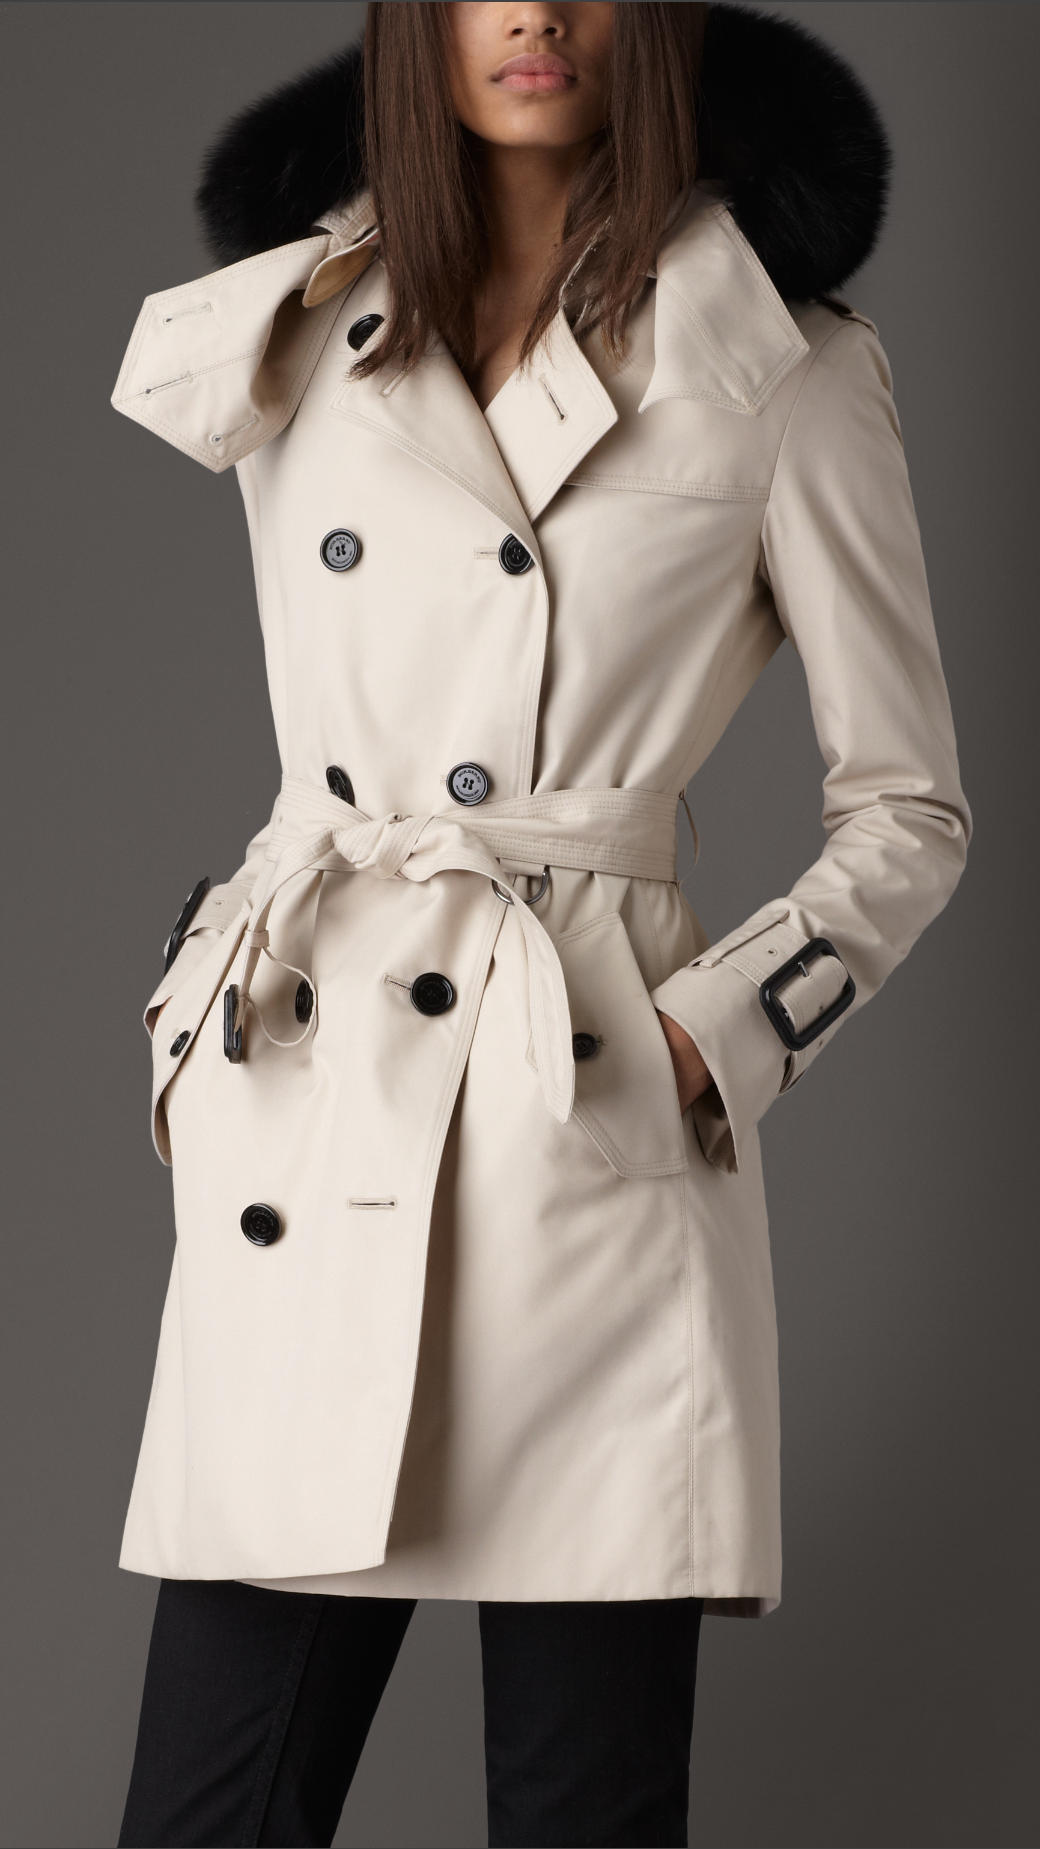 Lyst - Burberry Mid-Length Hooded Cotton Poplin Trench Coat in Natural